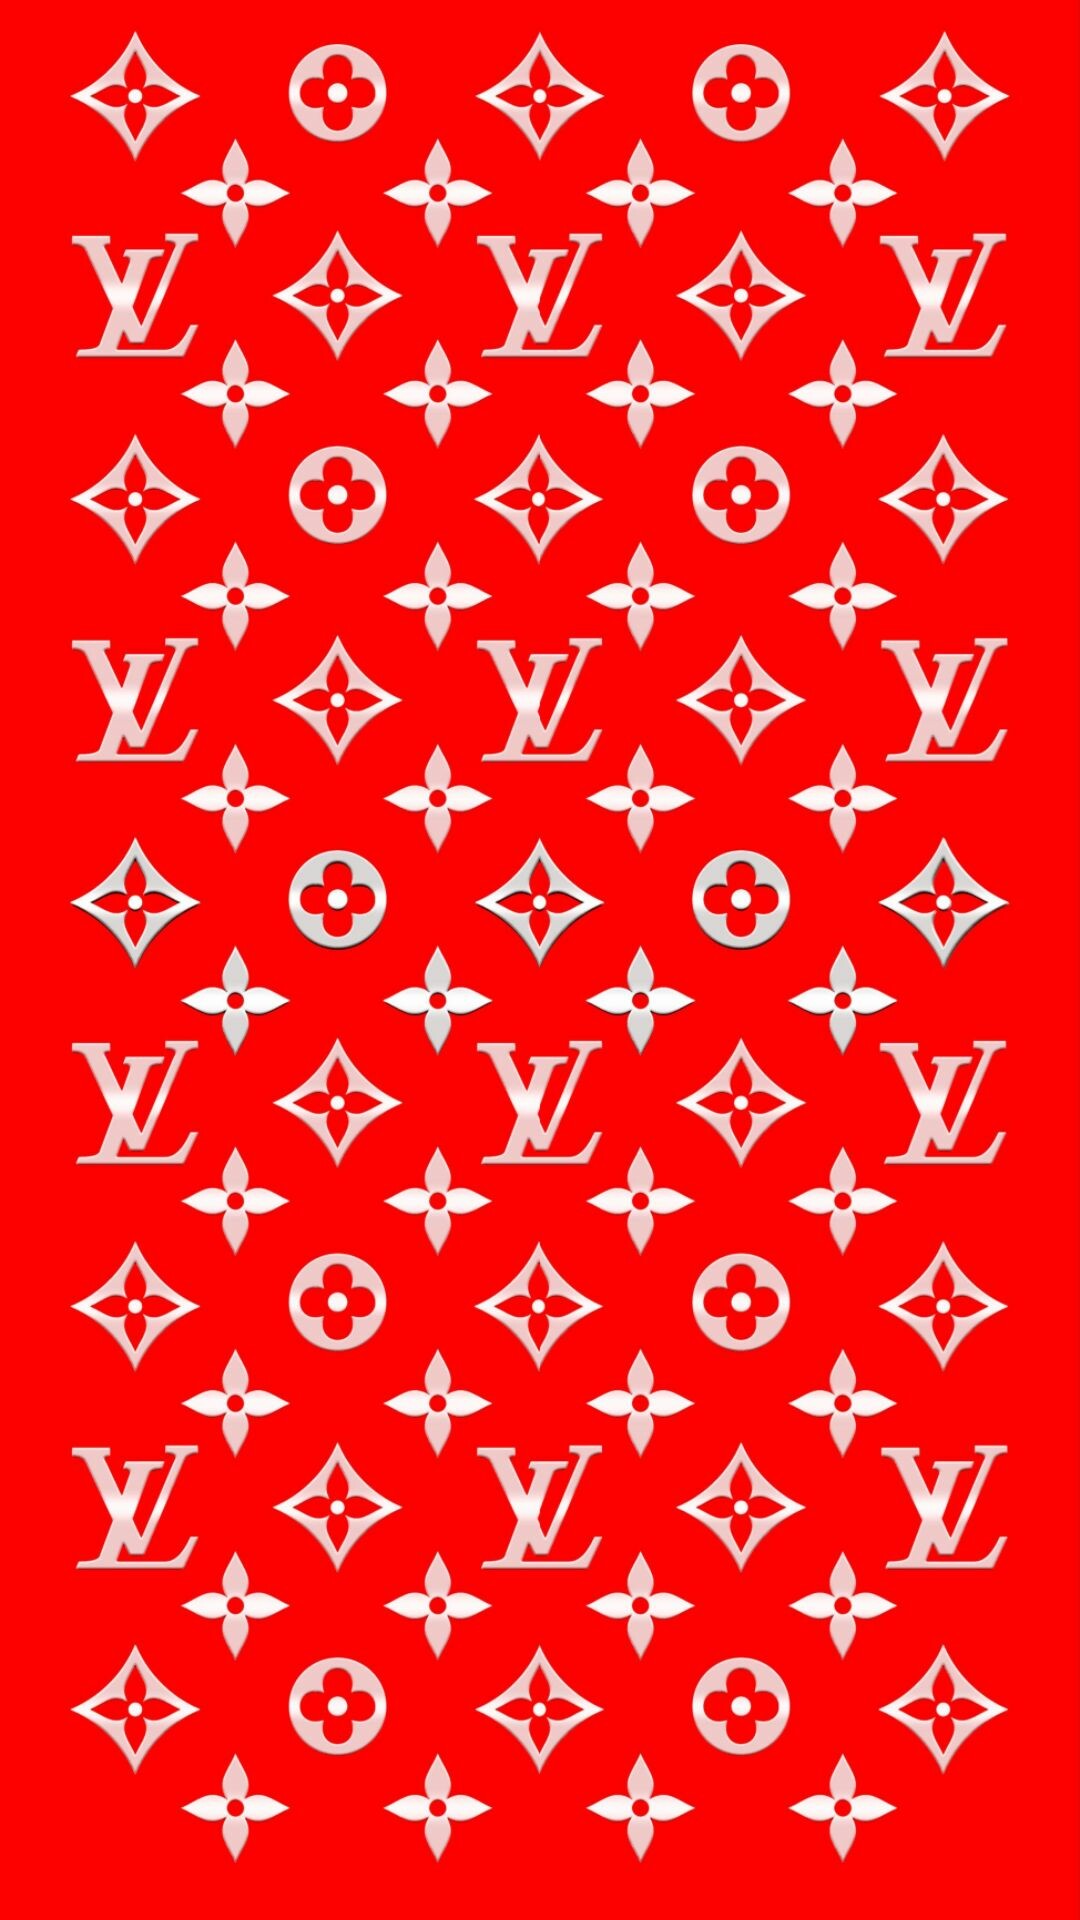 Louis Vuitton: The Tambour watch collection was introduced in 2002. 1080x1920 Full HD Background.